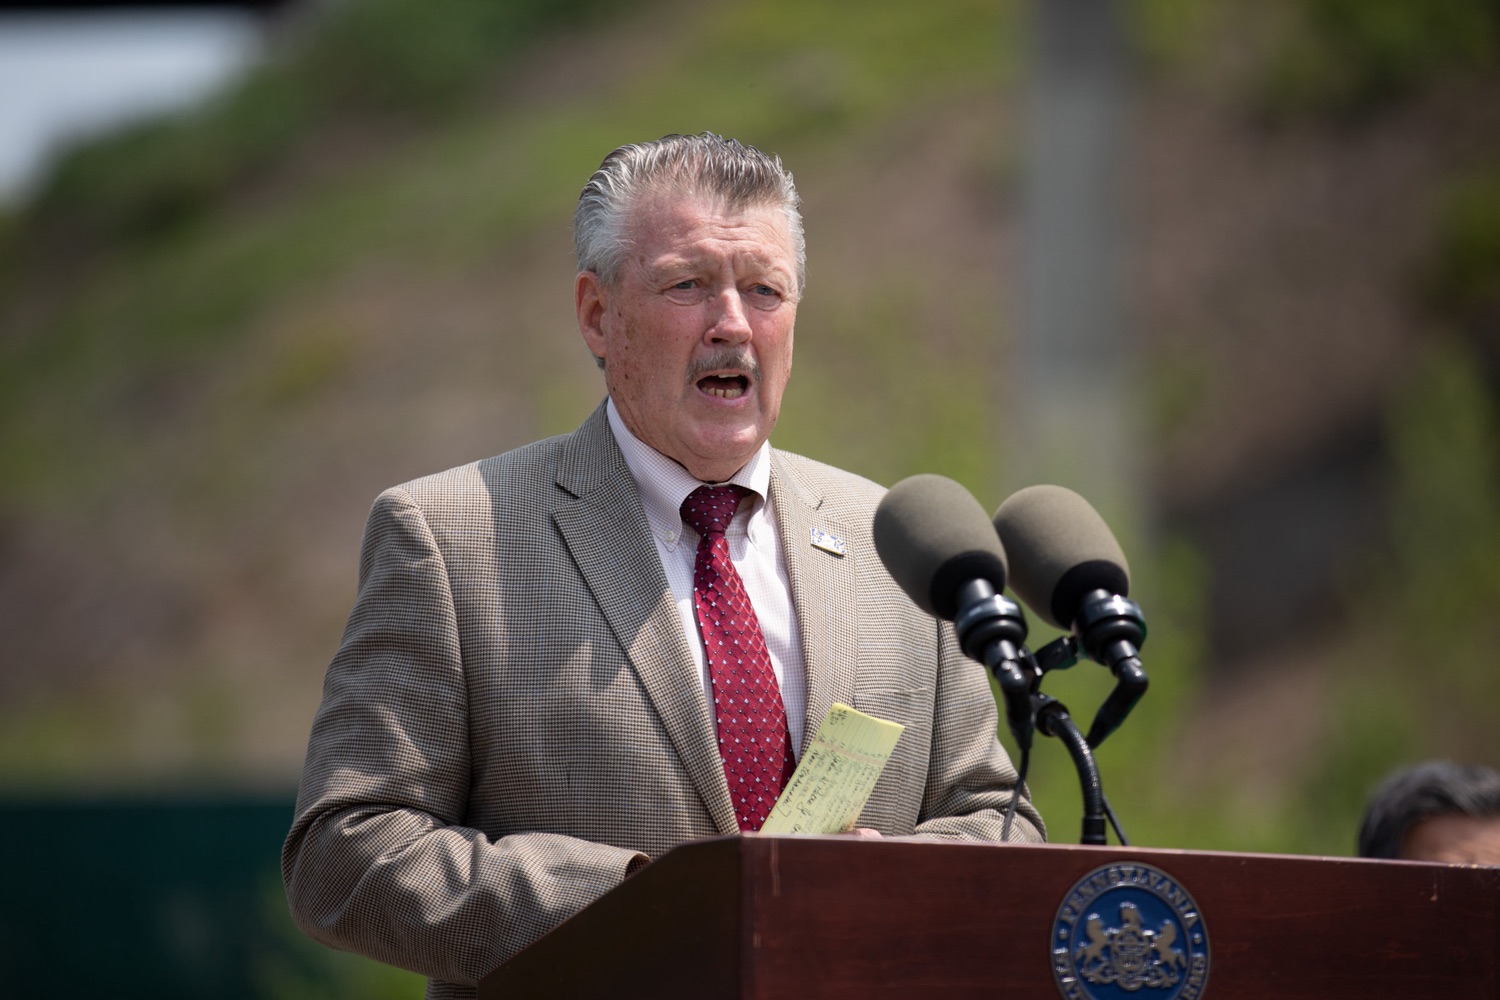 Senator Jim Brewster joined The Pennsylvania Turnpike Commission (PTC) and elected officials to break ground signifying construction is underway for the Mon/Fayette Expressway PA Route 51 to I-376 Projects southern section. Decades ago, Pennsylvania state legislators entrusted the PTC with building the Mon/Fayette Expressway (PA Turnpike 43) and in 1988 the first section of the Mon/Fayette Expressway got underway..For 35 years, the Mon Fayette Expressway has been part of the landscape leading into the Mon Valley. As funding became available, sections of the Mon/Fayette Expressway were completed creating the current 54 miles of expressway from I-68 near Morgantown, WV to Jefferson Hills Borough in Allegheny County..With the passing of Act 89 in 2013, a funding stream was made available to move ahead with the next section of the Mon/Fayette Expressway..Beyond the obvious benefits of creating a safe, reliable and open roadway for easy travel, this project and others like it also create an opportunity for development in the area, saysSen. James Brewster. Just look at how the opening of the Southern Beltway has spurred commercial and industrial development in the airport corridor with the recent announcement of the Fort Cherry Development District. Once the Mon/Fayette Expressway is finished, it will do the same for the Mon Valley..<br><a href="https://filesource.amperwave.net/commonwealthofpa/photo/22981_PTC_MonFayette_ERD_003.jpg" target="_blank">⇣ Download Photo</a>